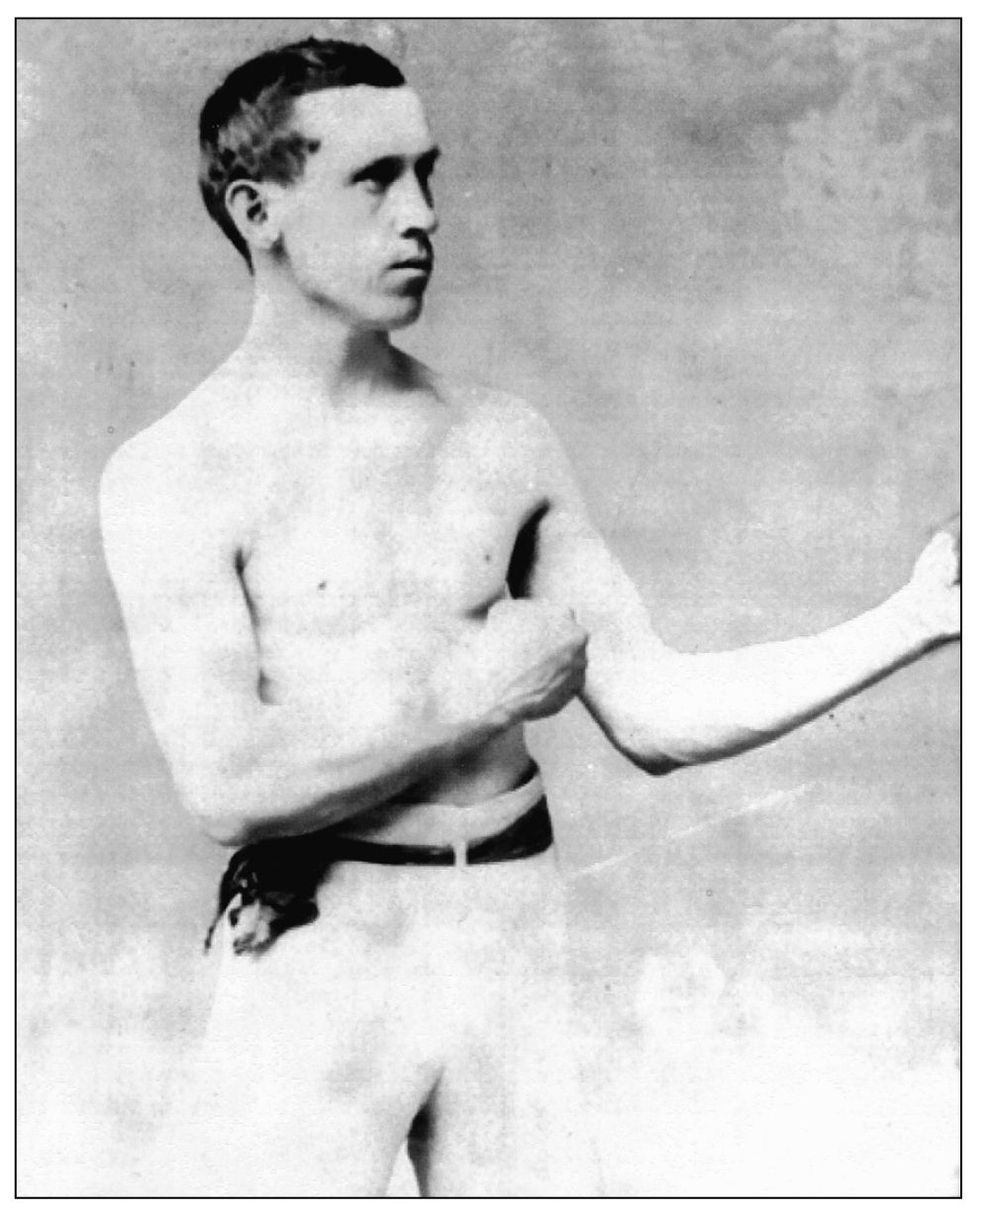 HARRY GILMOREMAKER OF CHAMPIONS Gilmore was Chicago boxings greatest teacher - photo 4